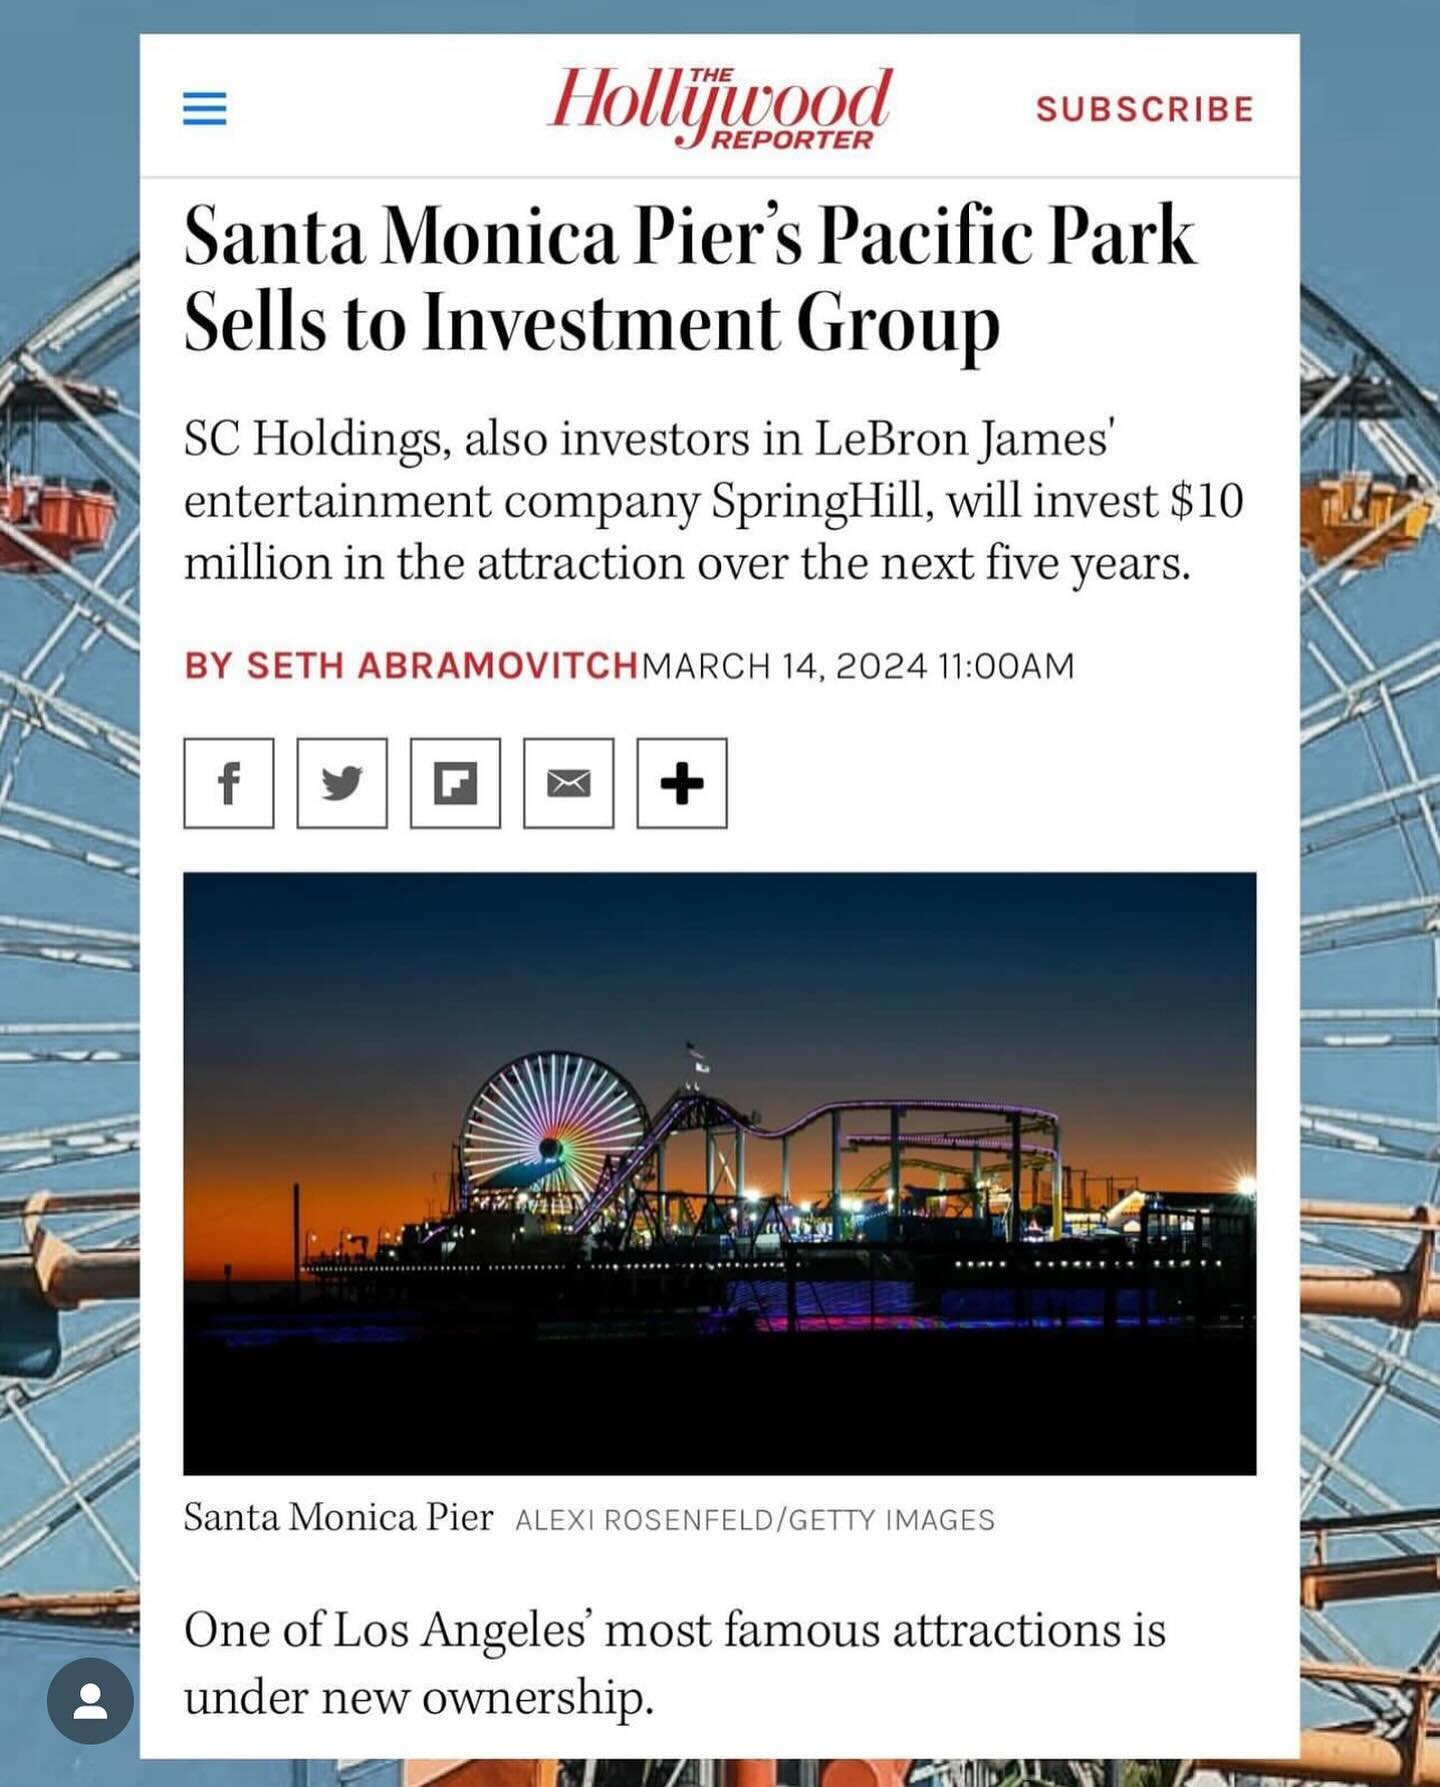 Proud to be a partner and investor in this iconic American landmark along with the team at SC Holdings.
Some big announcements and changes coming soon!
#NemanVentures @pacpark